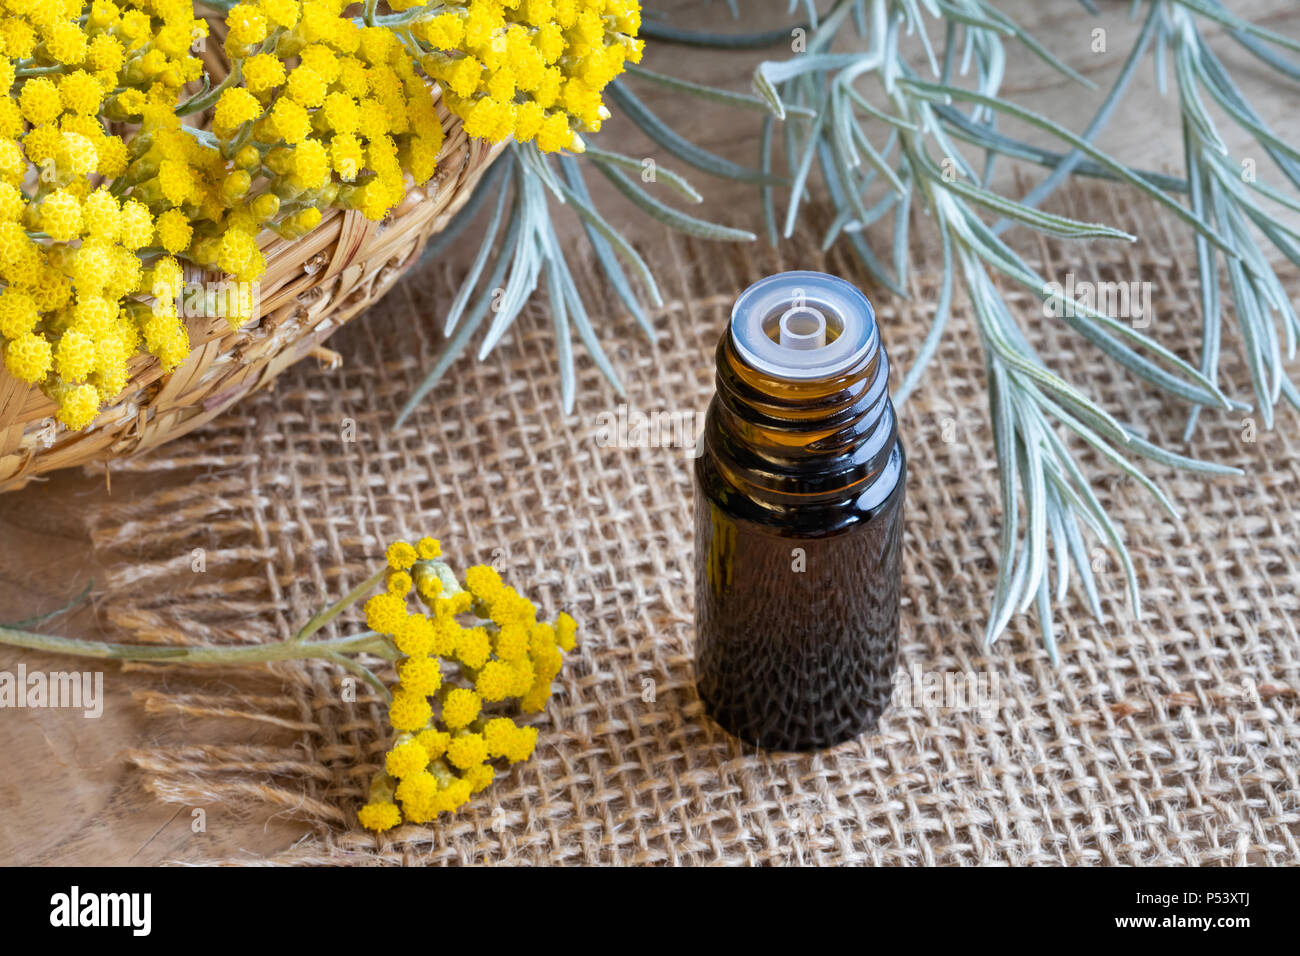 A bottle of essential oil with fresh blooming helichrysum italicum plant Stock Photo